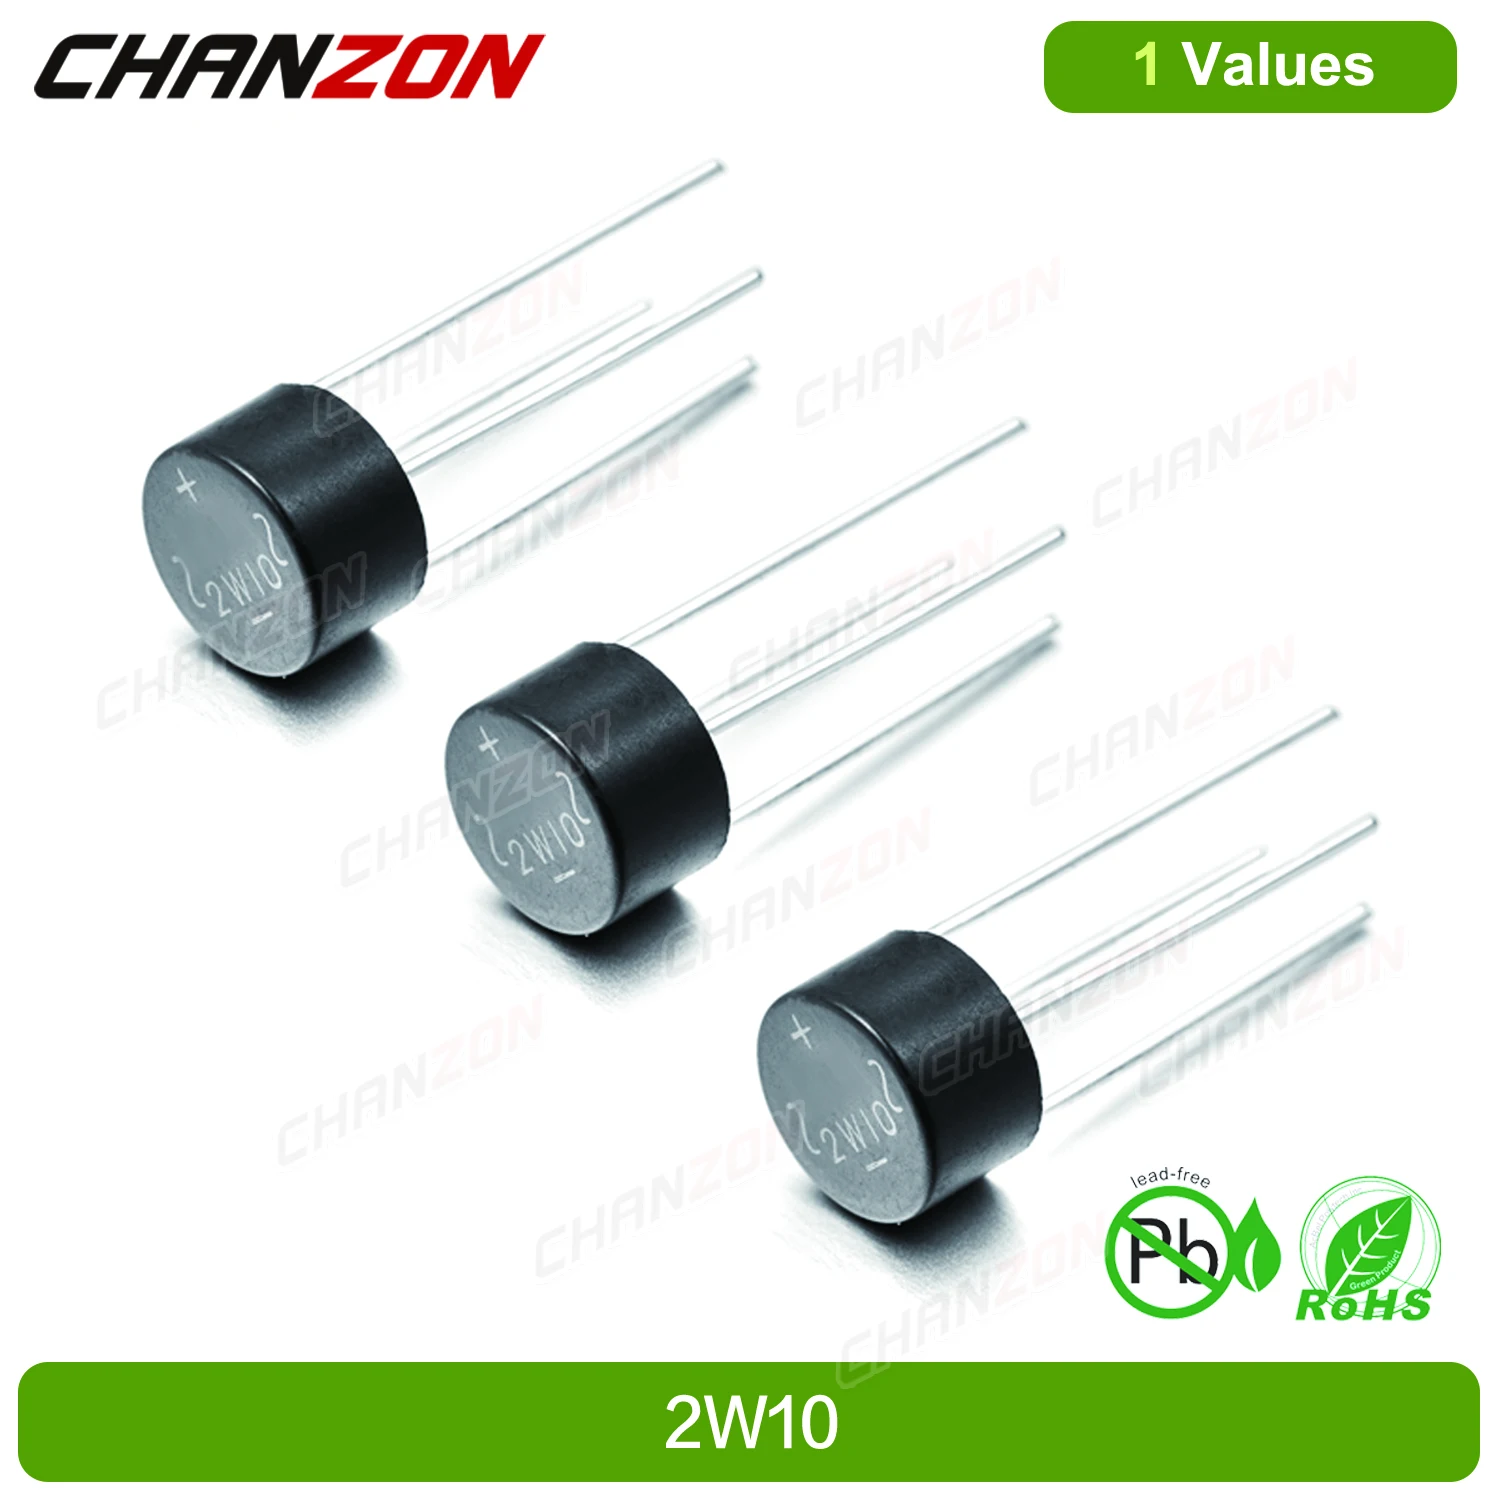 

20Pcs 100% Original 2W10 Brand New Diode Bridge Rectifier 2A 1000V WOB Single Phase Full Wave Through Hole Axial Silicon Diodes